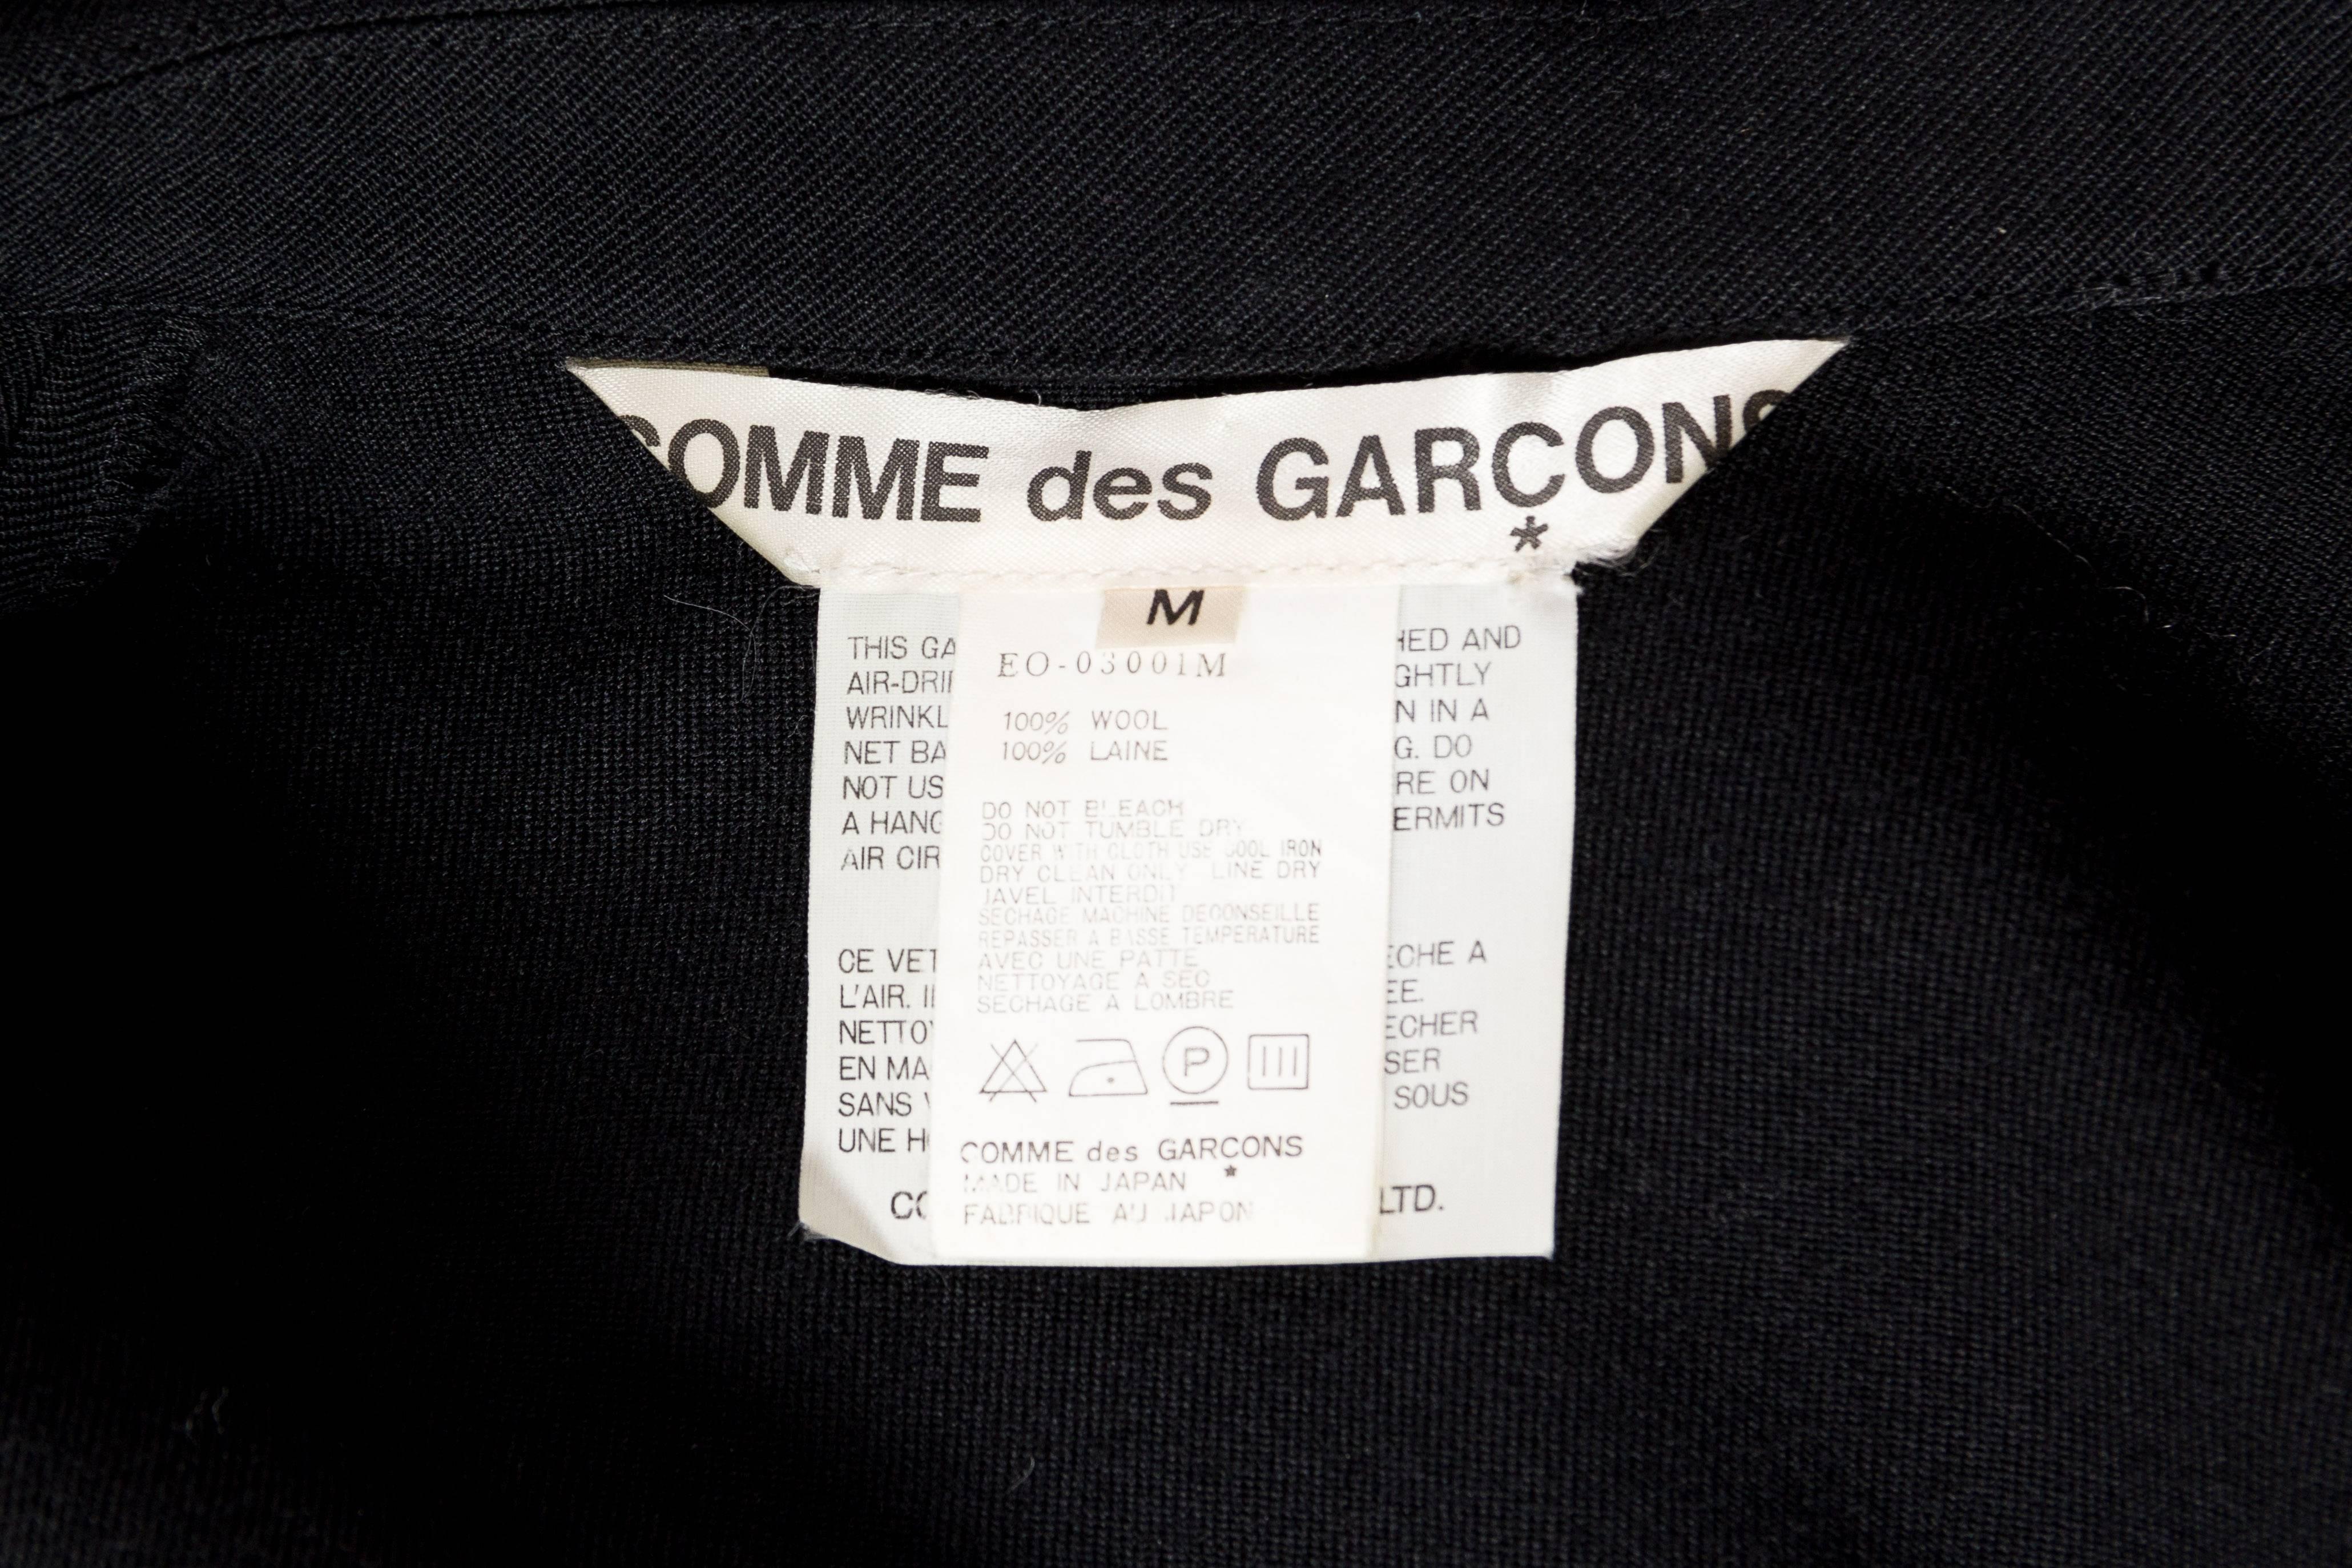 1990S COMME DES GARCONS Black Wool Deconstructed Ruffled Dress For Sale 7